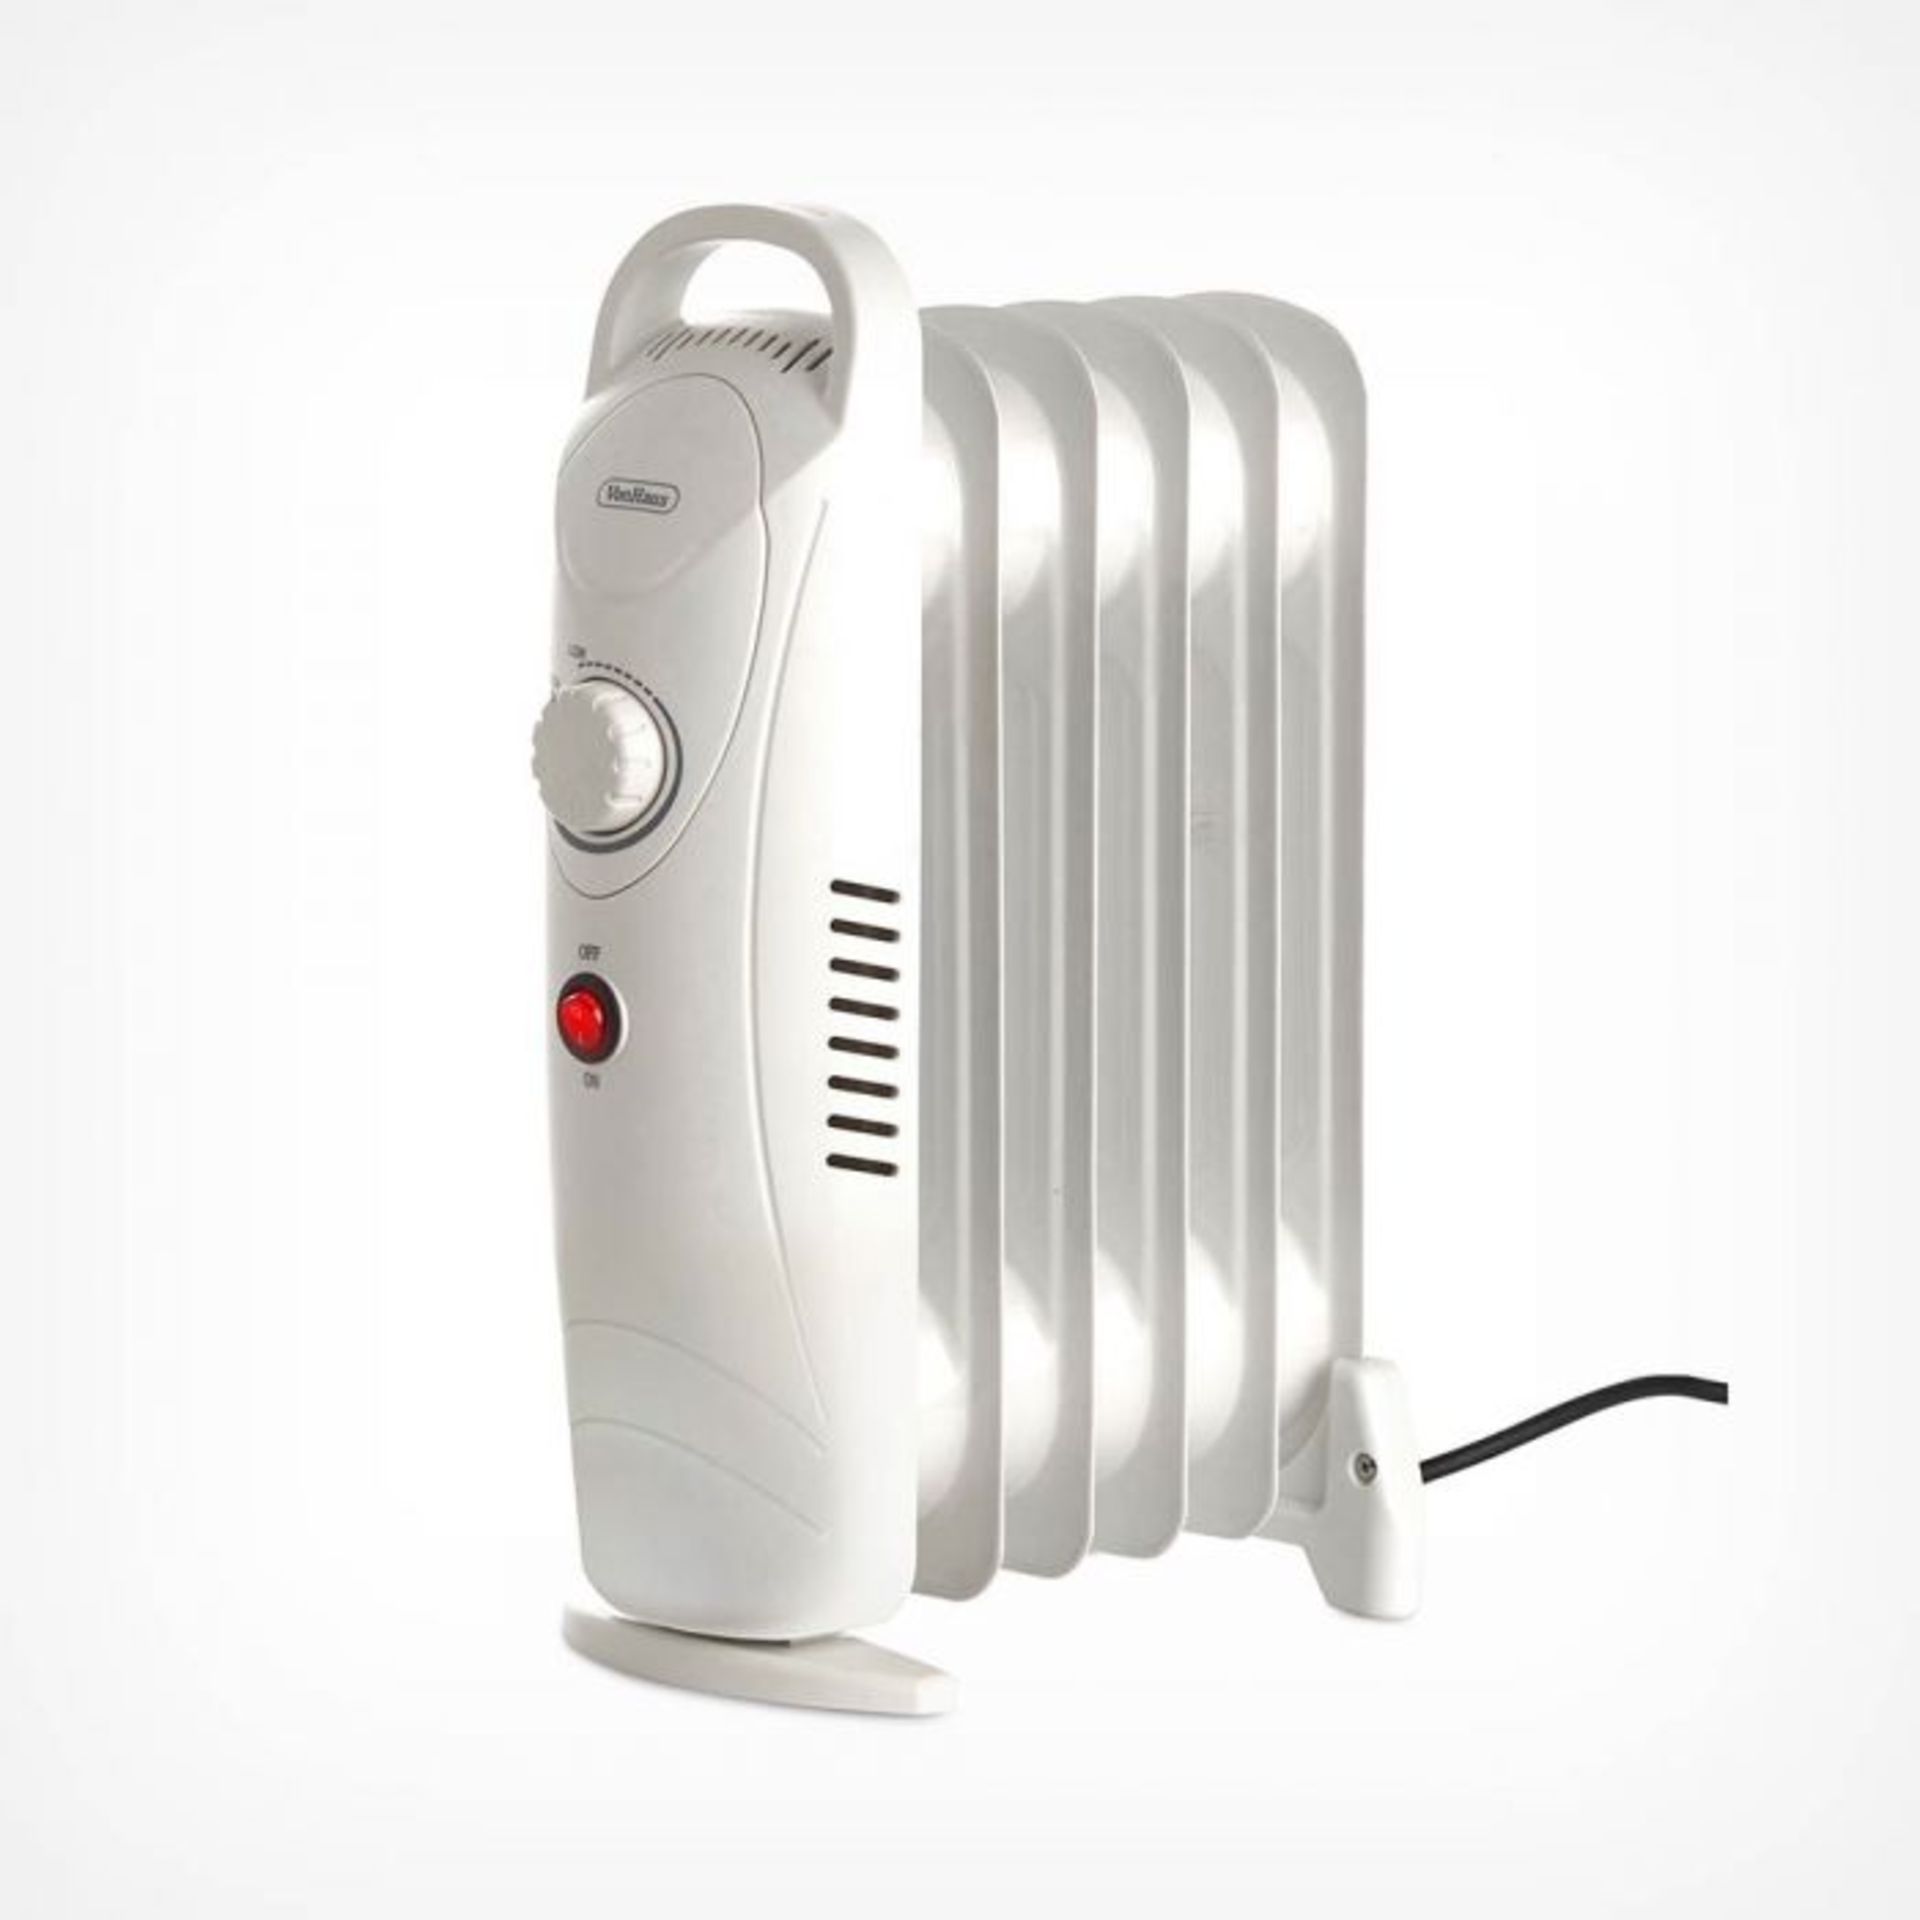 (V163) 6 Fin 800W Oil Filled Radiator - White Compact yet powerful 800W radiator with 6 oil-fi... - Image 2 of 3